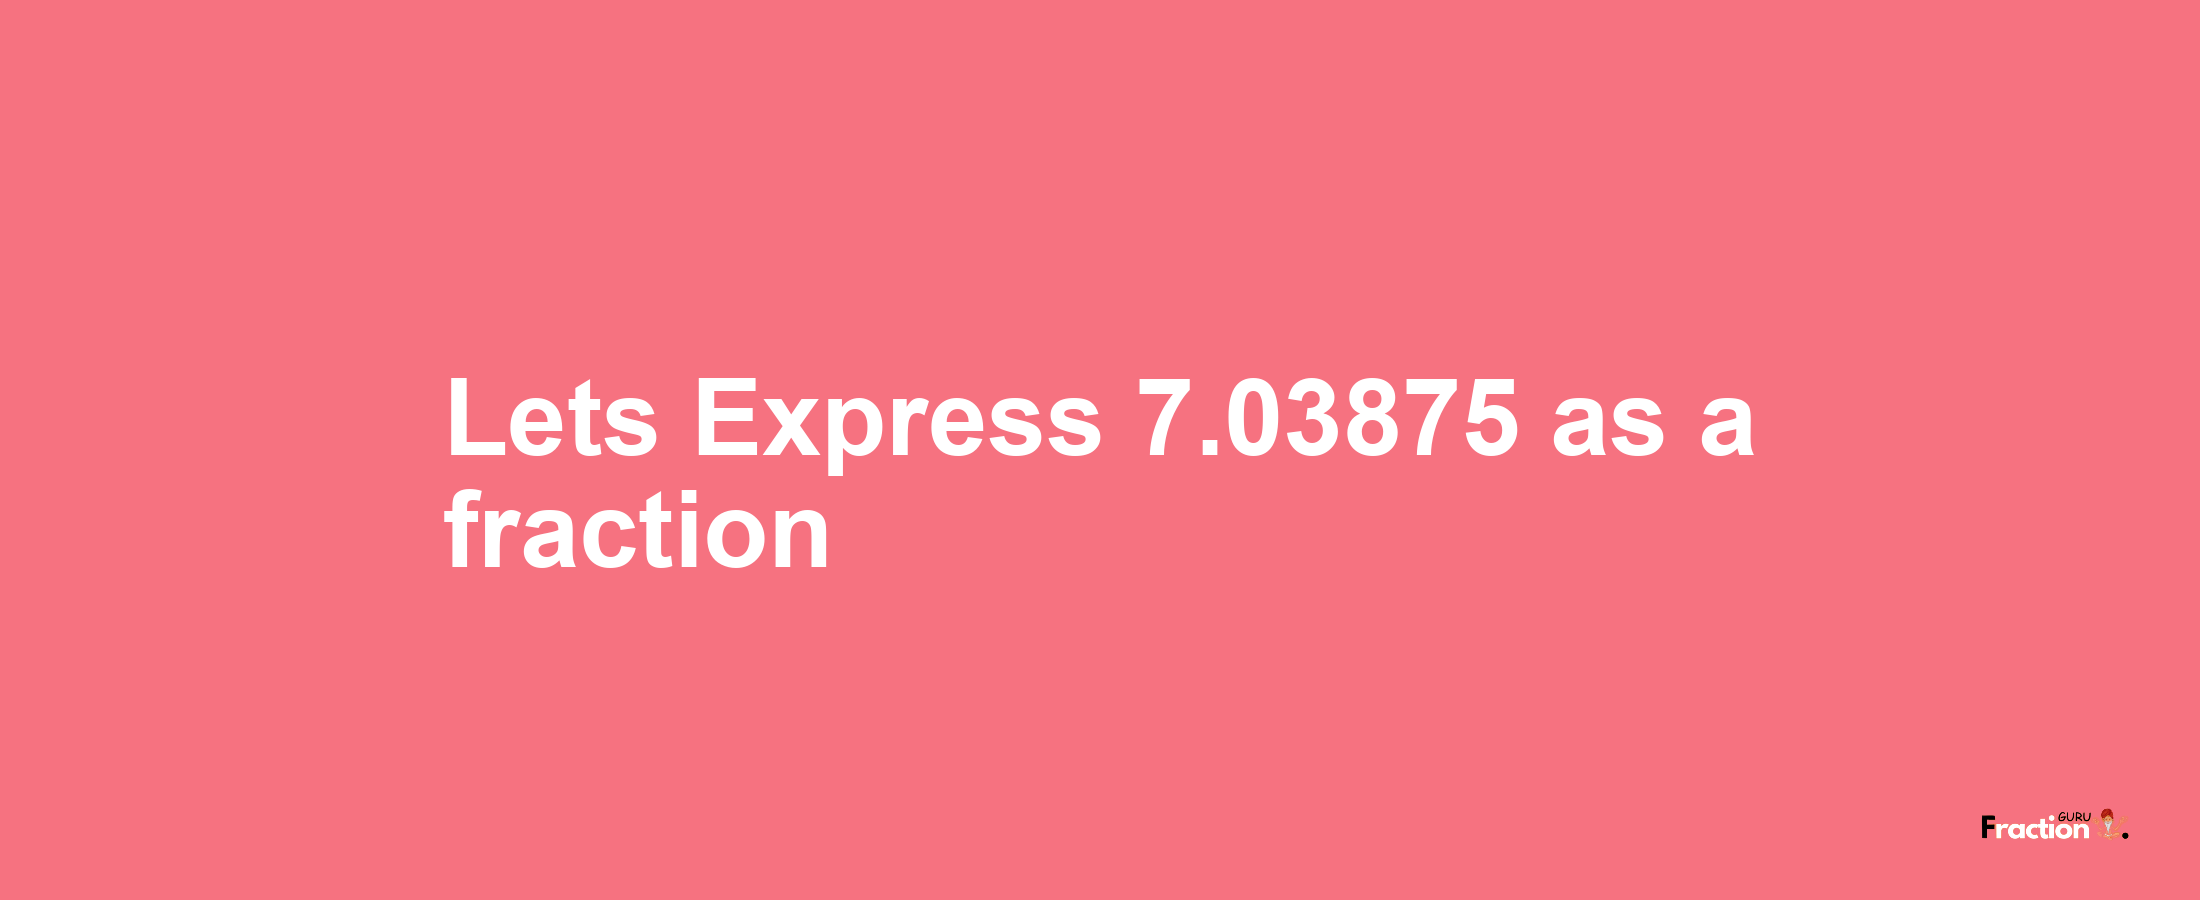 Lets Express 7.03875 as afraction